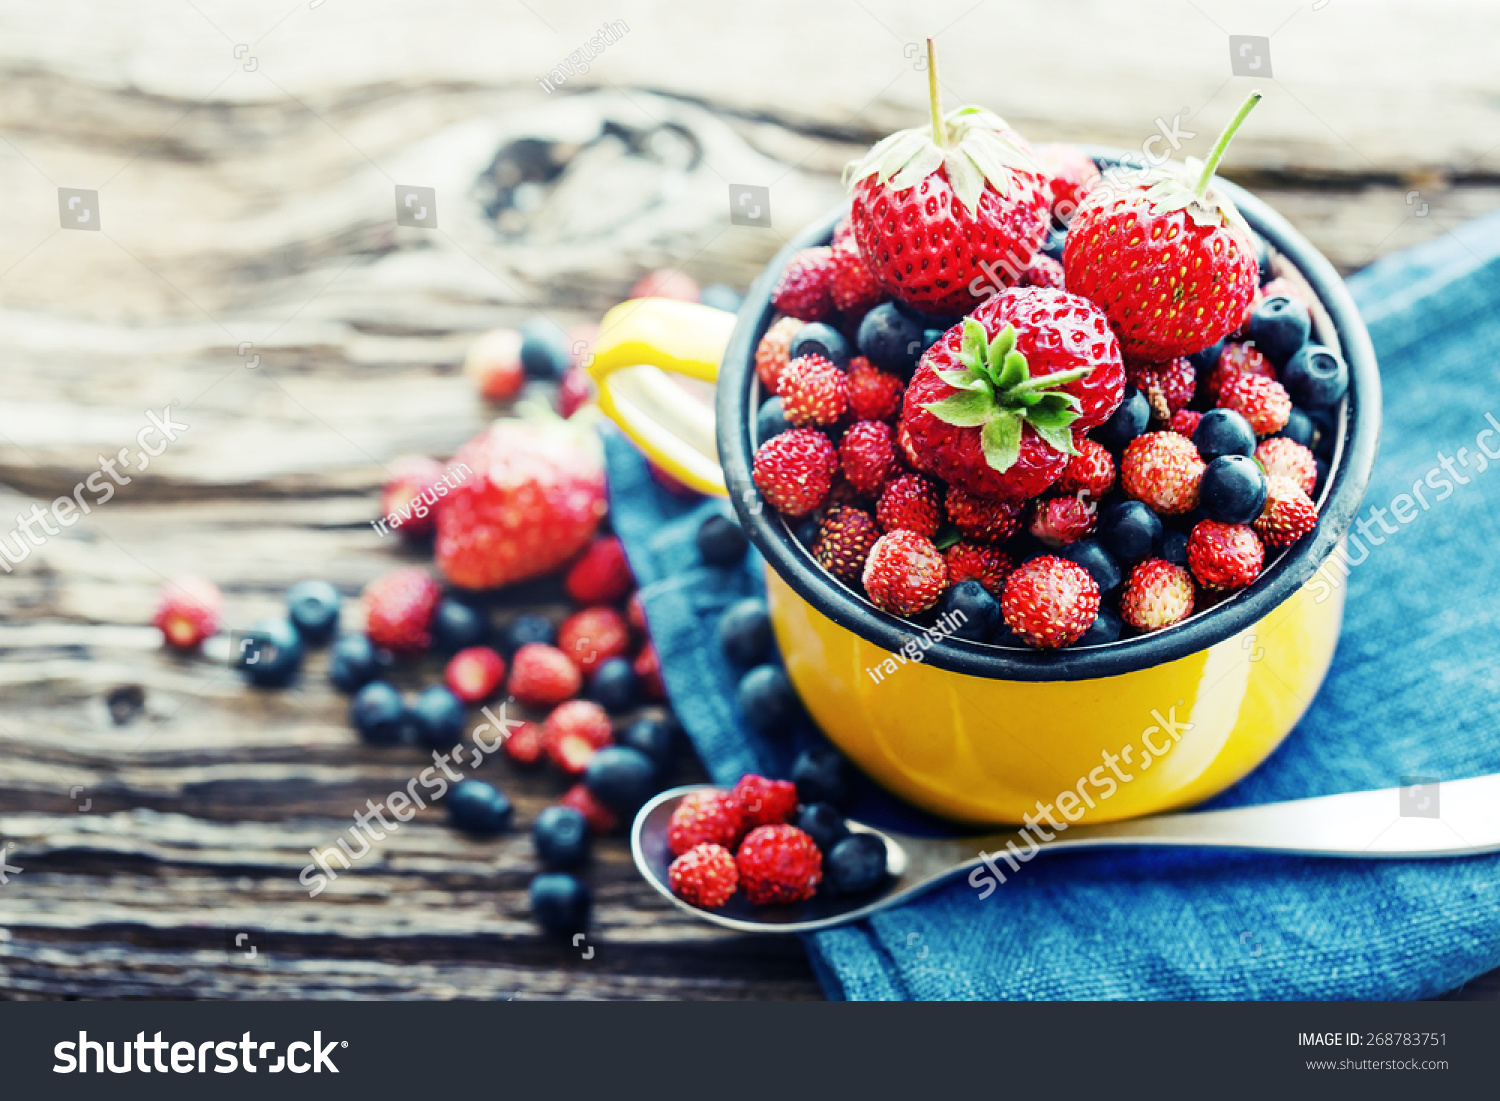 Berries on Wooden Background. Summer Organic Berry over Wood. Agriculture, Gardening, Harvest Concept #268783751